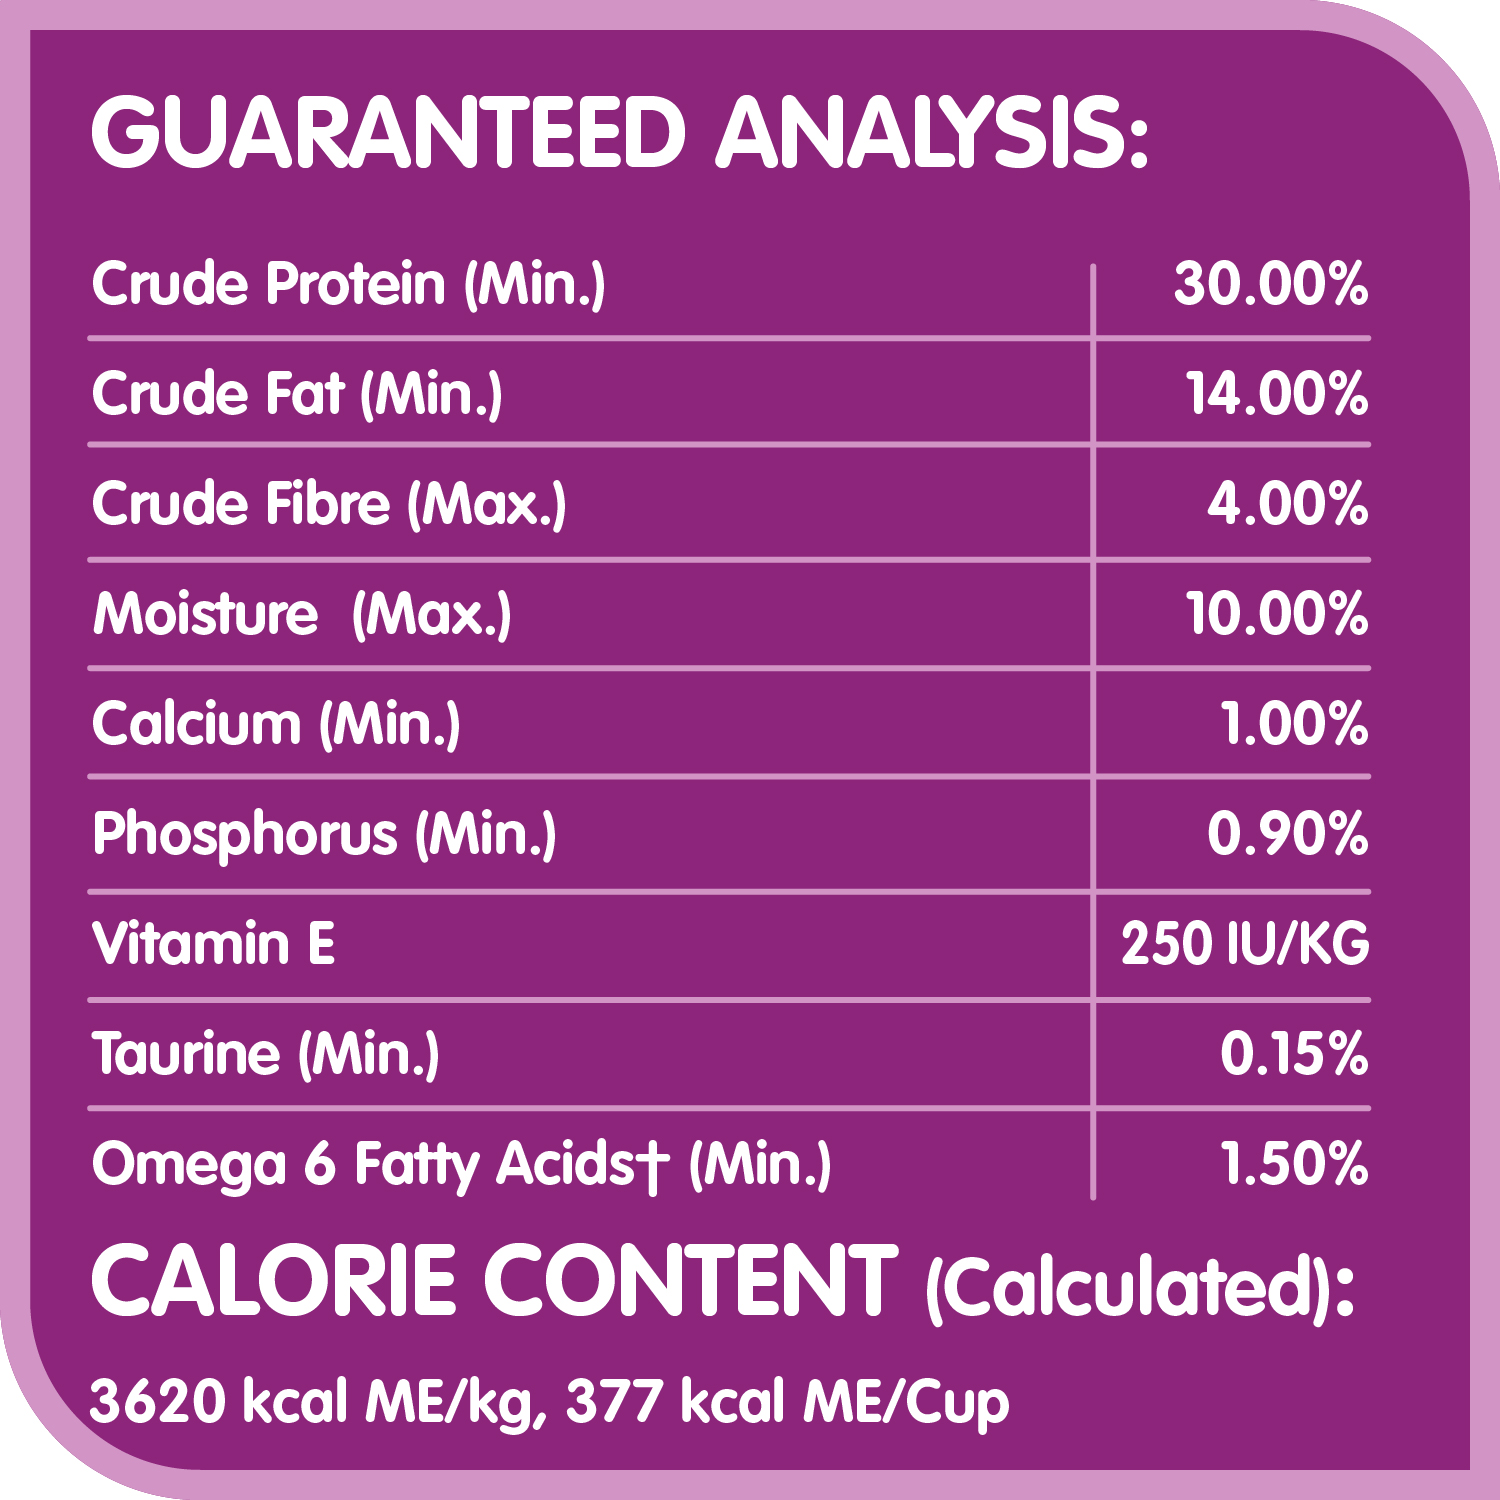 WHISKAS® MEATY SELECTIONS™ with Real Chicken, 9.1kg guaranteed analysis image